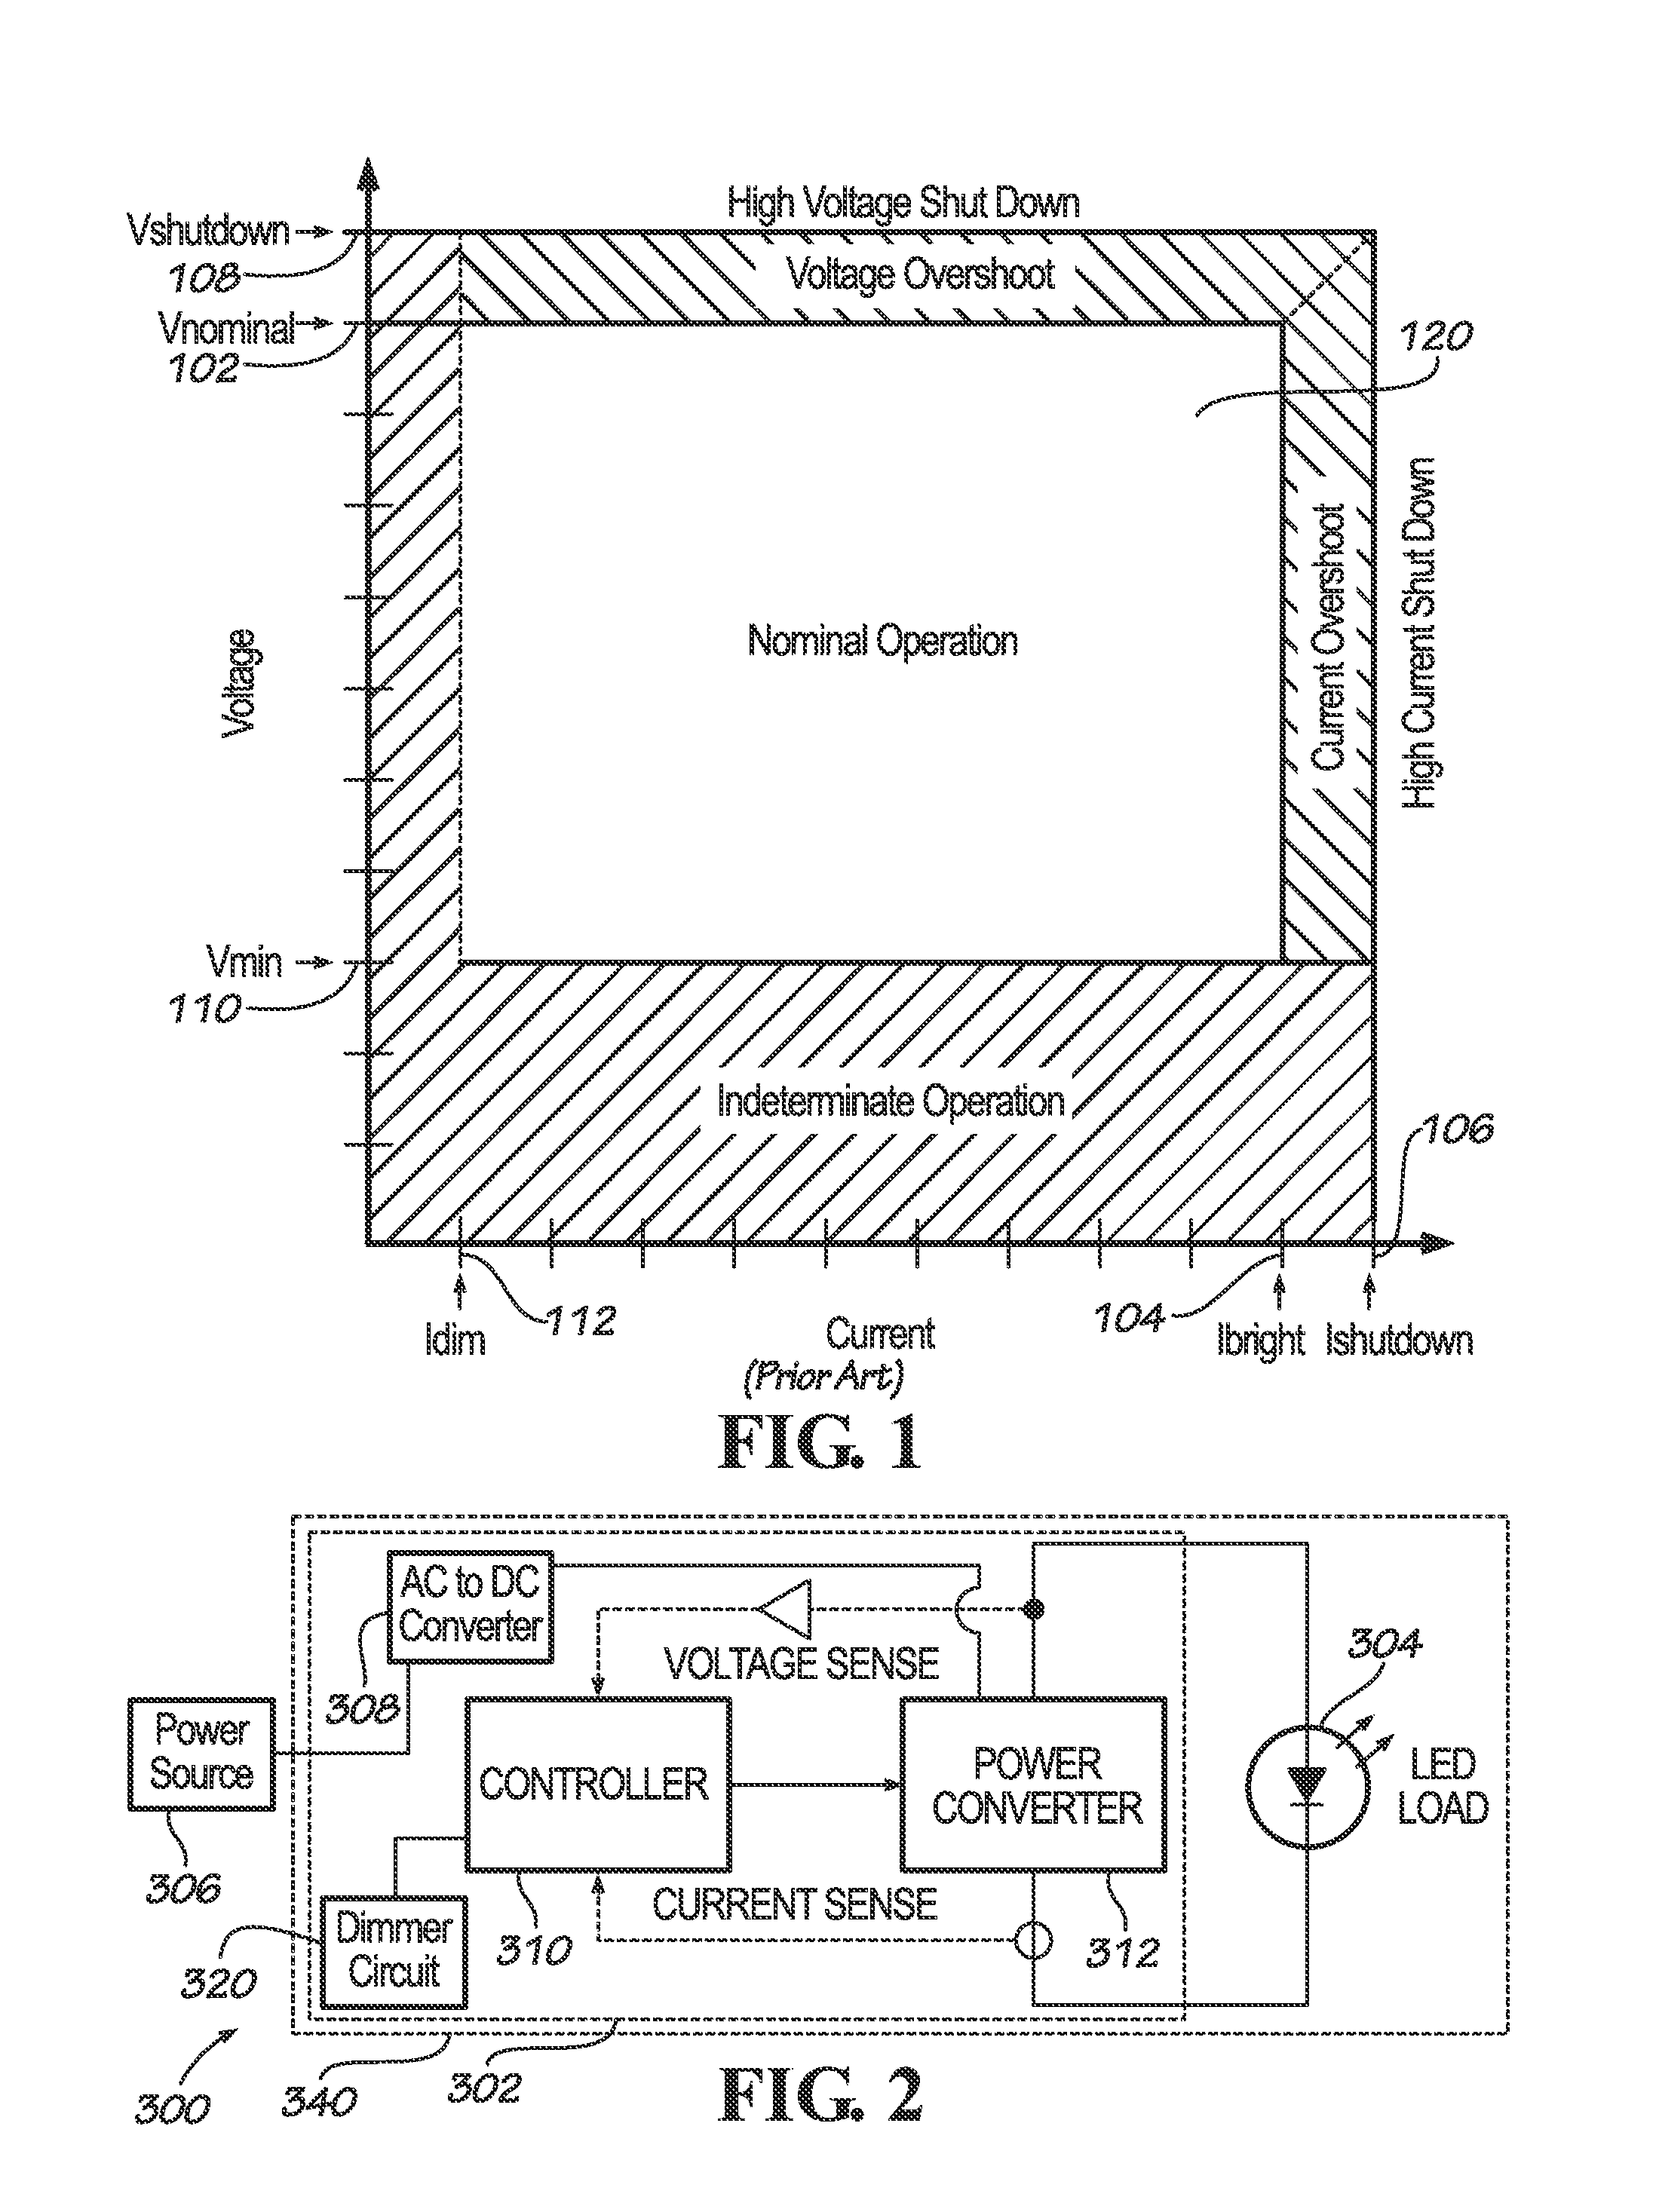 Method and circuit for LED load managment